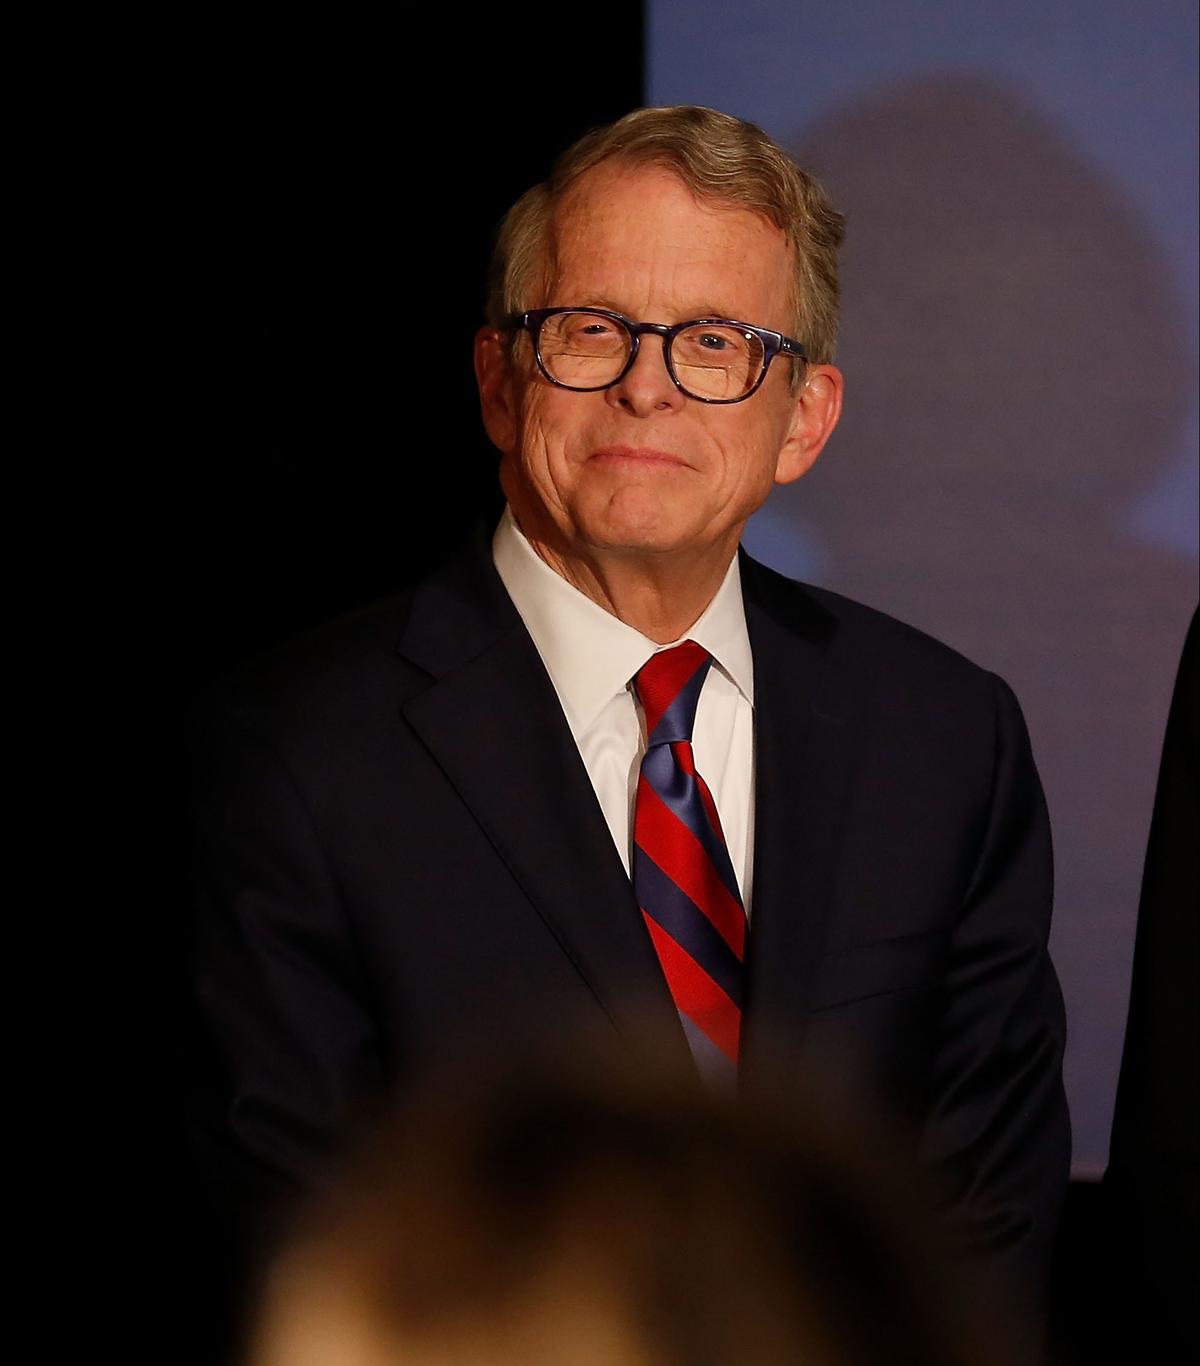 Republican Gubernatorial Candidate Ohio Attorney General Mike DeWine listens as Governor John Kasich gives a speech endorsing DeWine ahead of Tuesday's elections during a campaign event at the Boat House at Confluence Park in Columbus, Ohio, on Nov. 2, 2018. (Kirk Irwin/Getty Images)